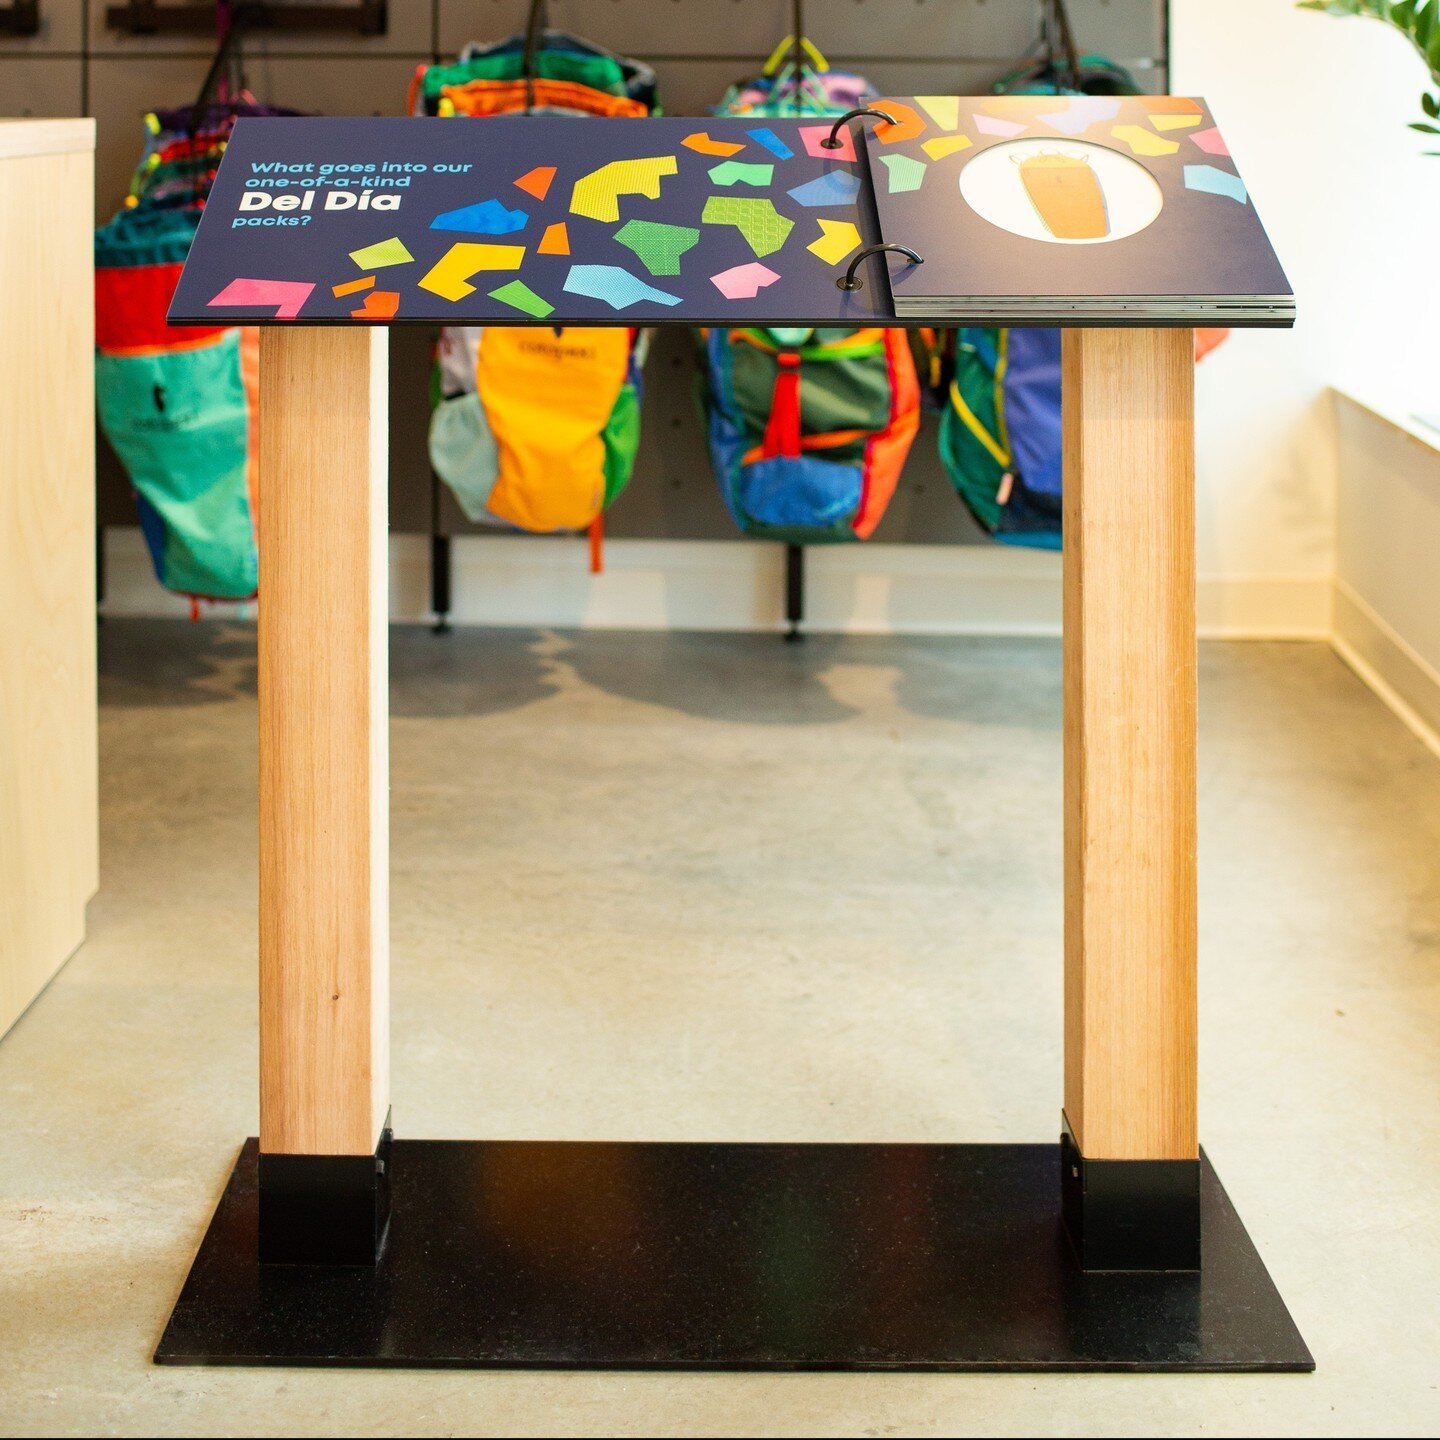 Another super-sweet in-store display for Cotopaxi Boulder. This interactive POP pedestal tells the inspiring history of Cotopaxi&rsquo;s Del D&iacute;a product line. Alternating pages have little peek-through moments that preview the unfolding story.